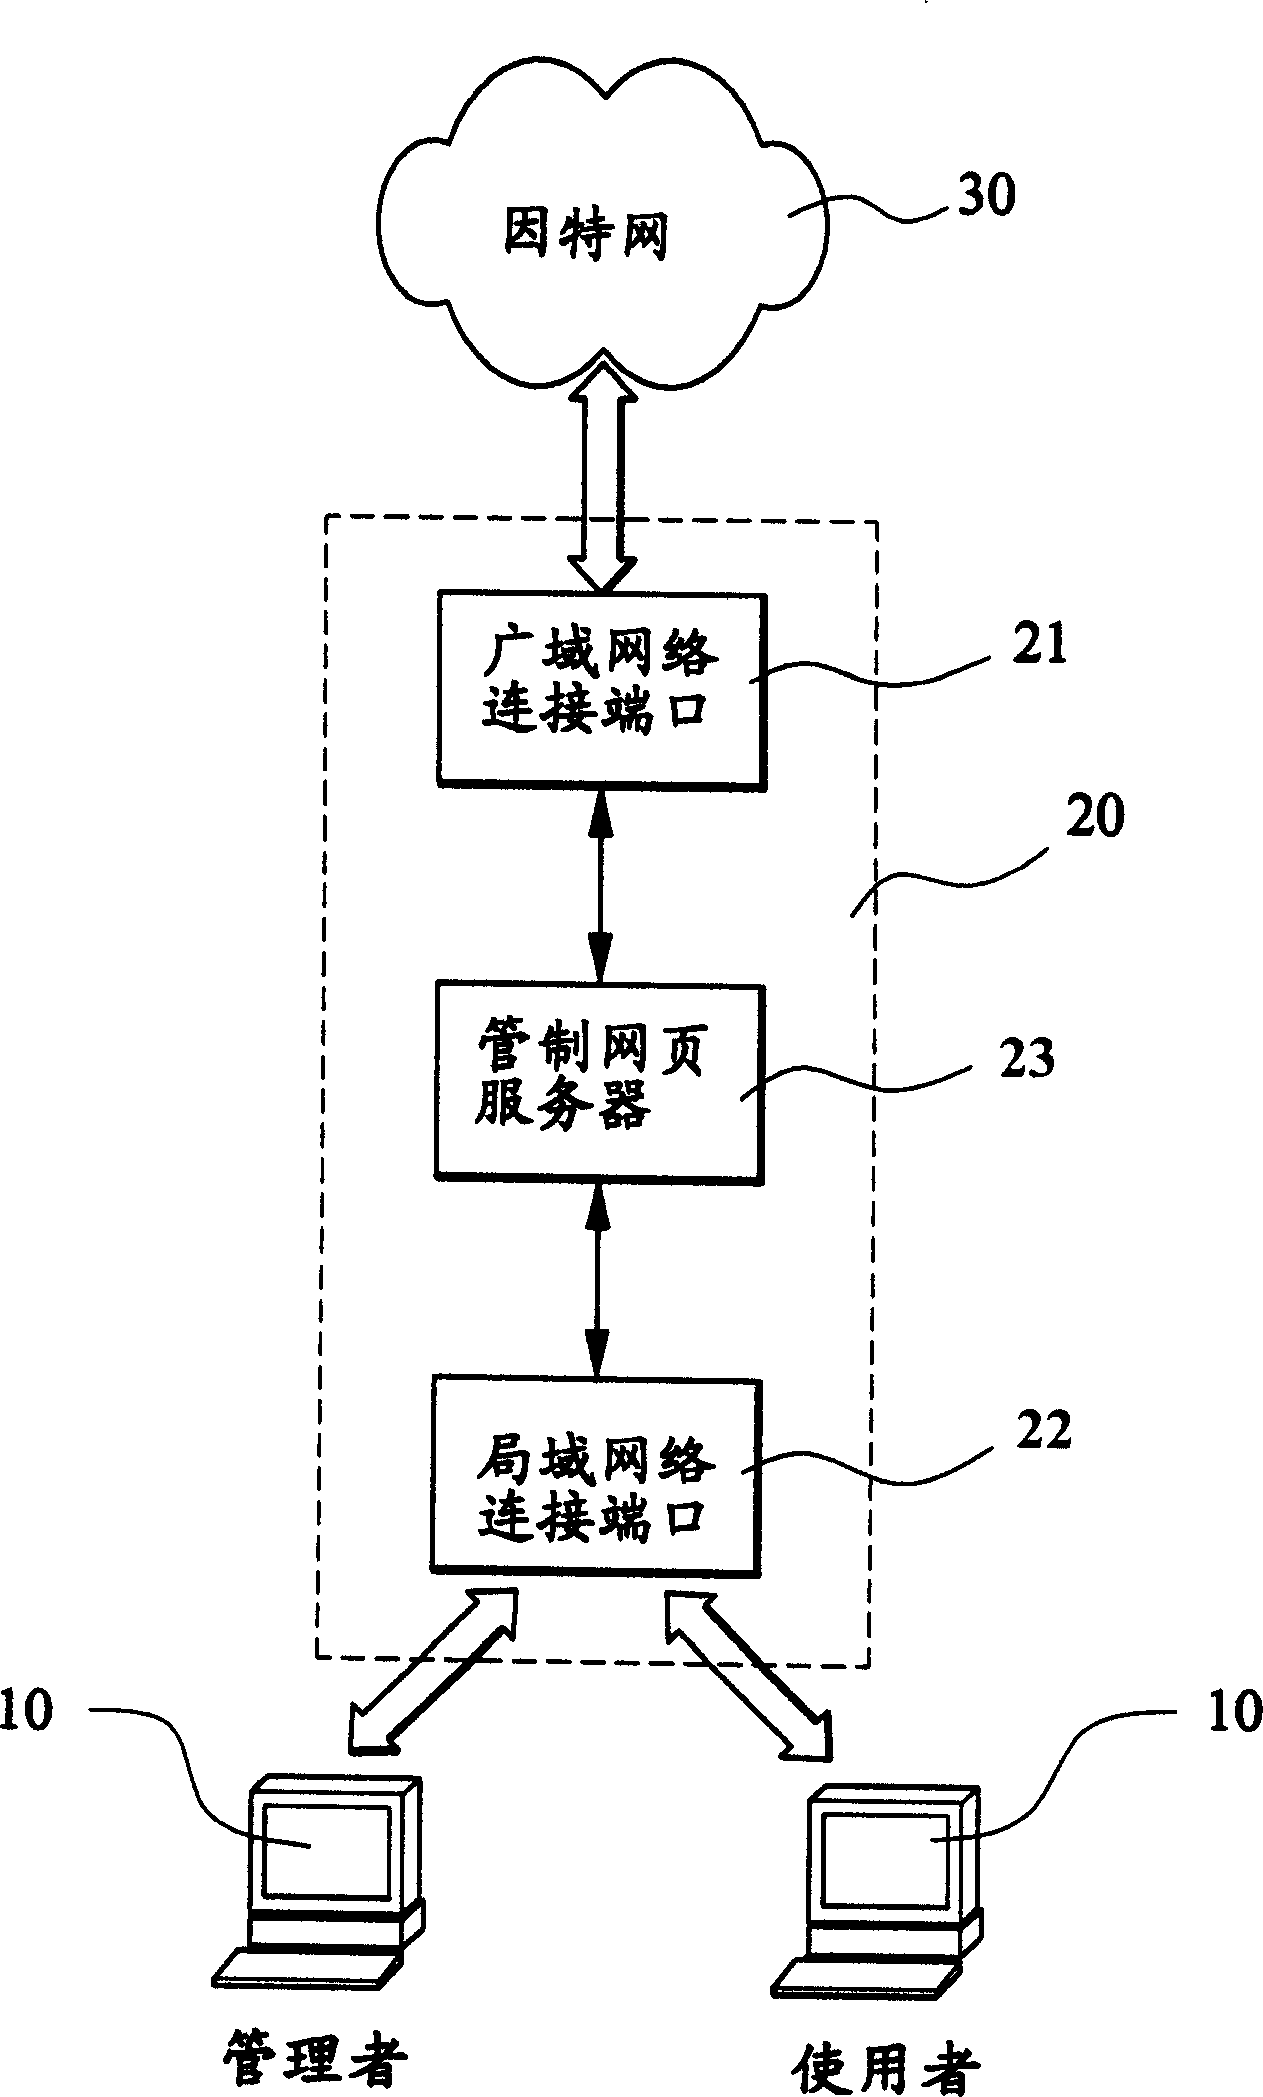 Network management and device thereof